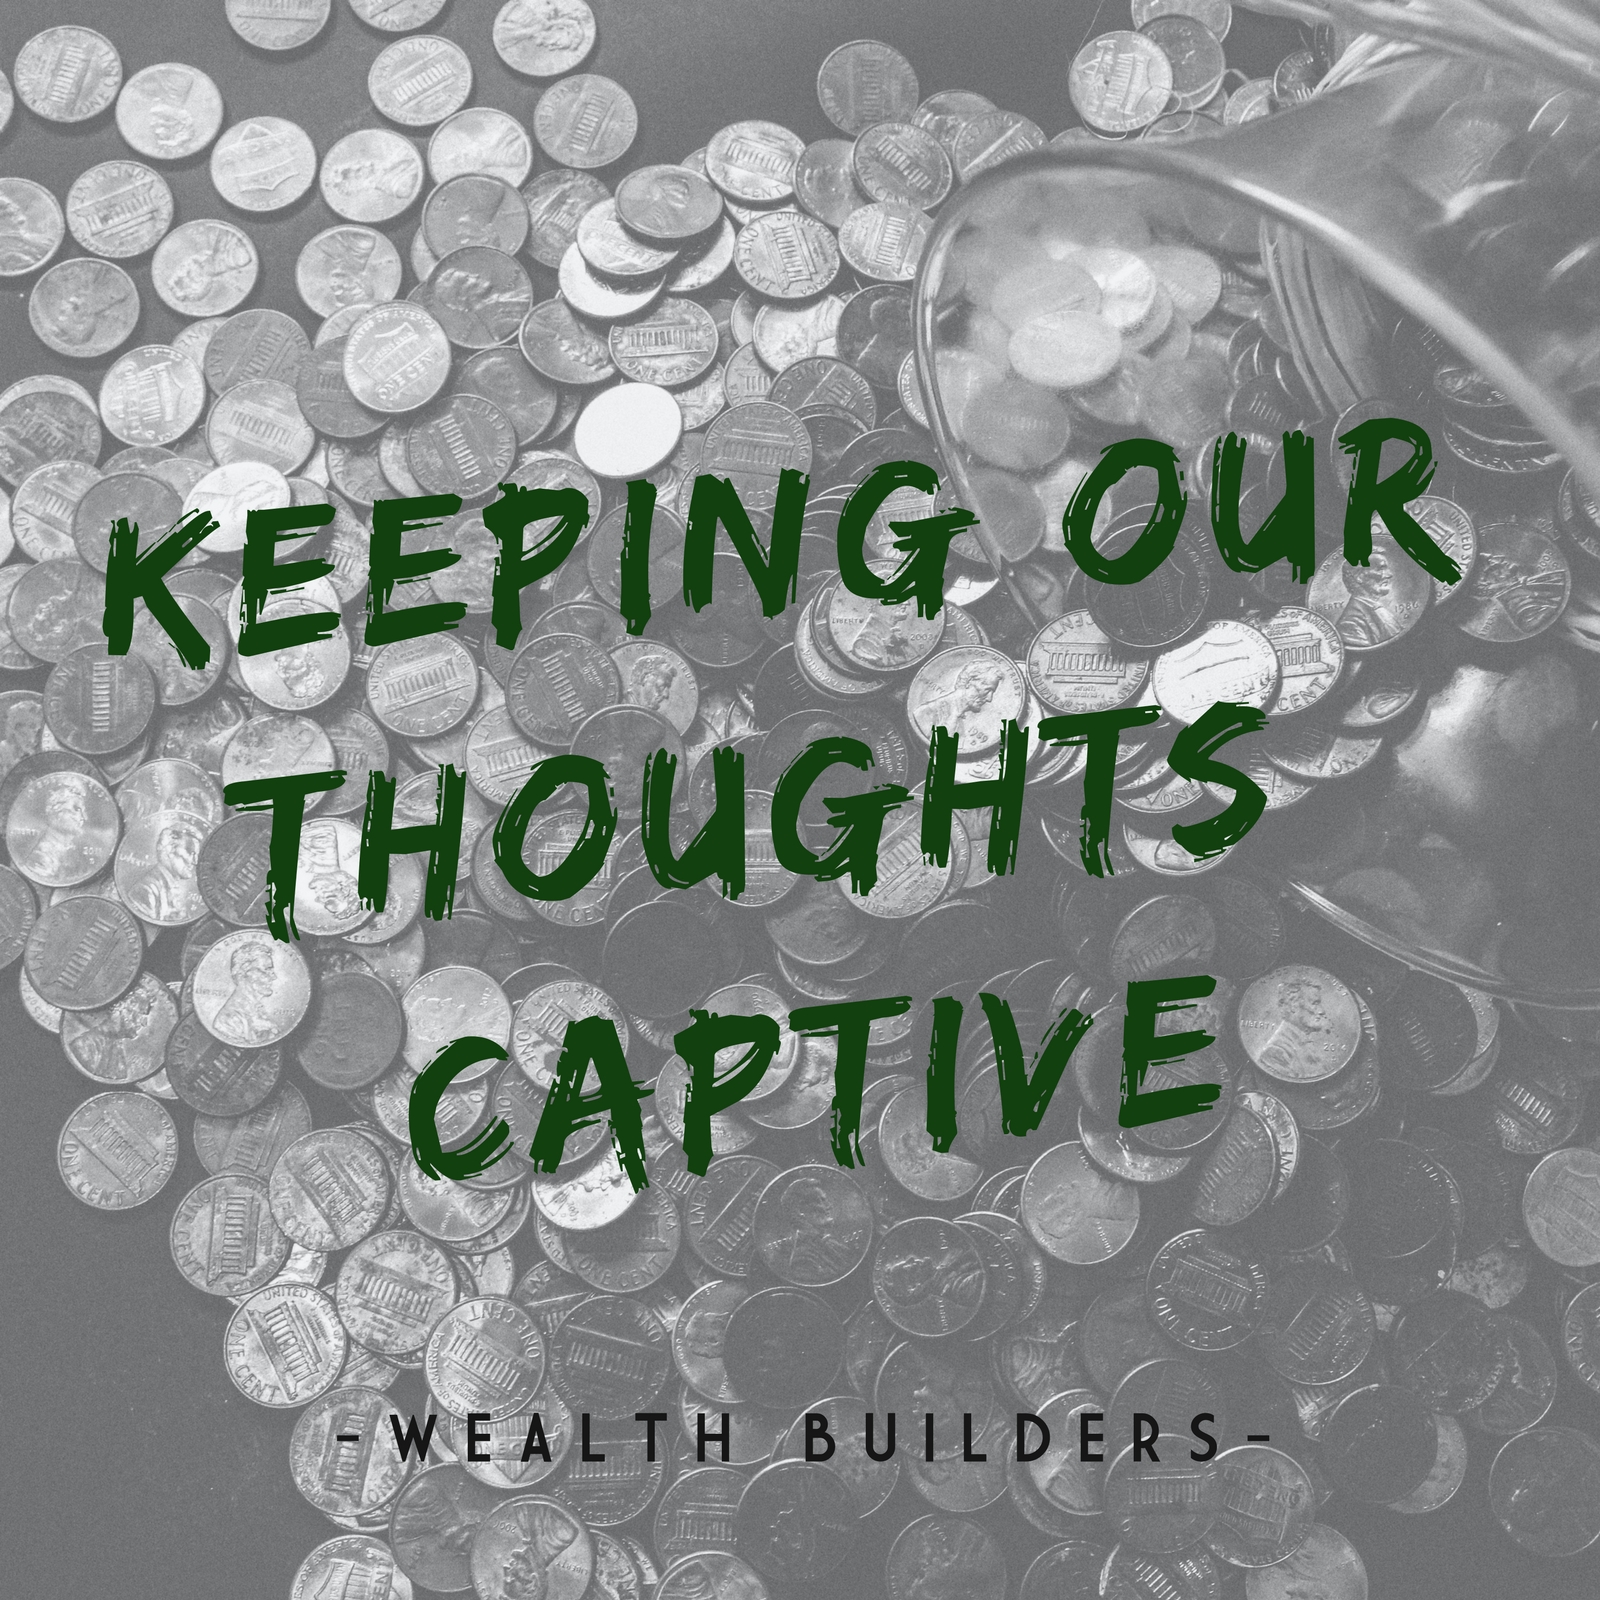 Keeping Our Thoughts Captive